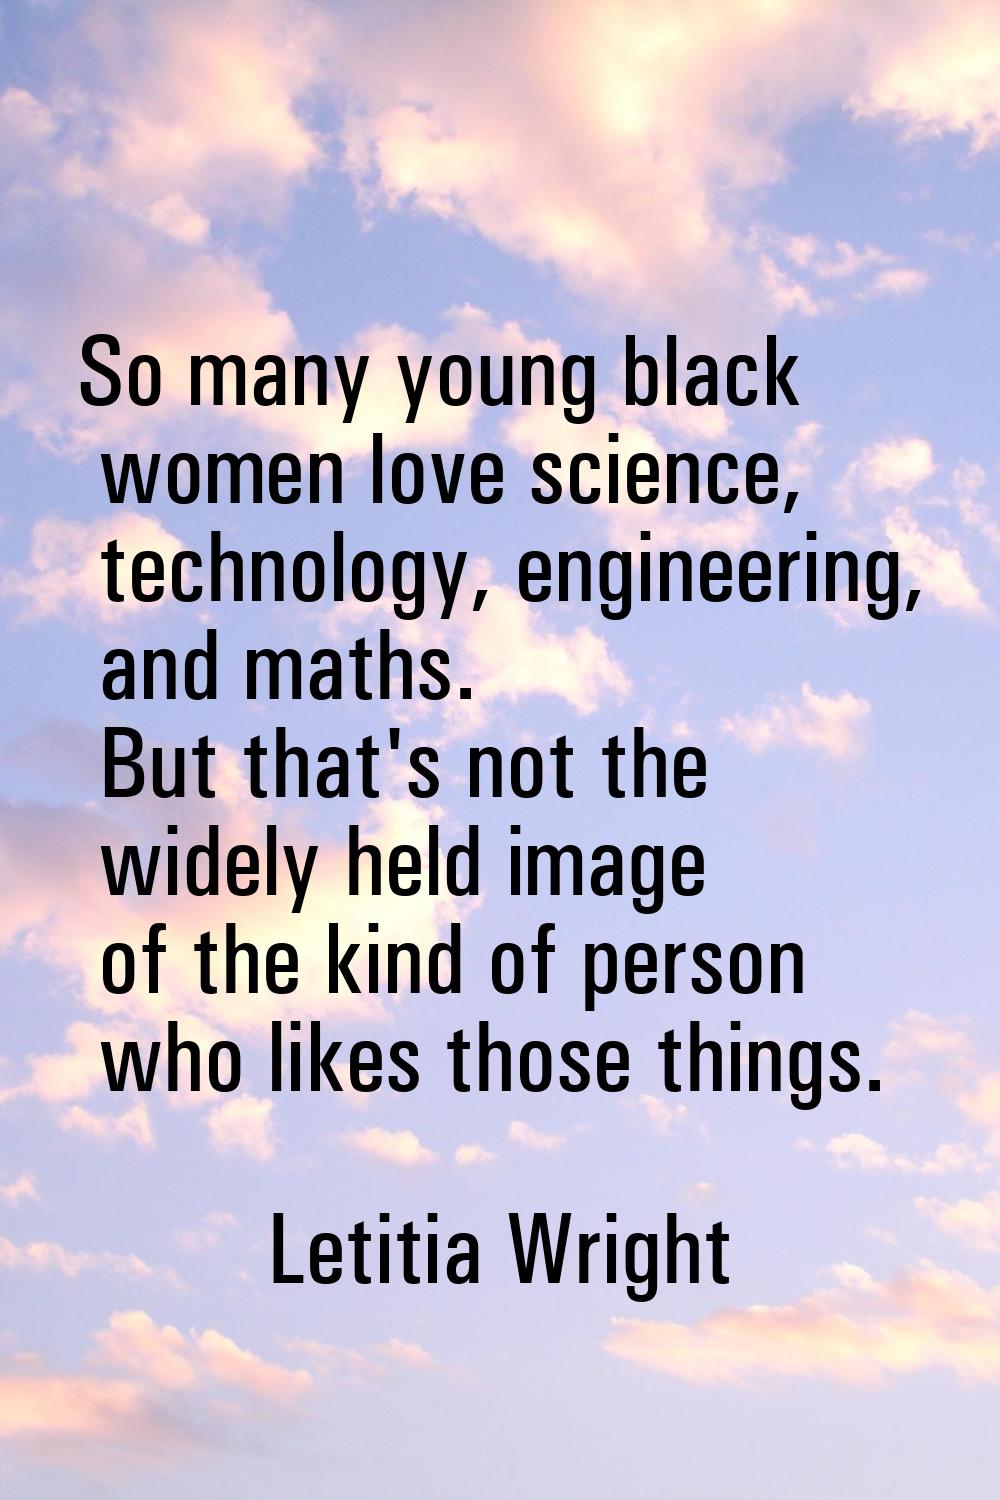 So many young black women love science, technology, engineering, and maths. But that's not the wide